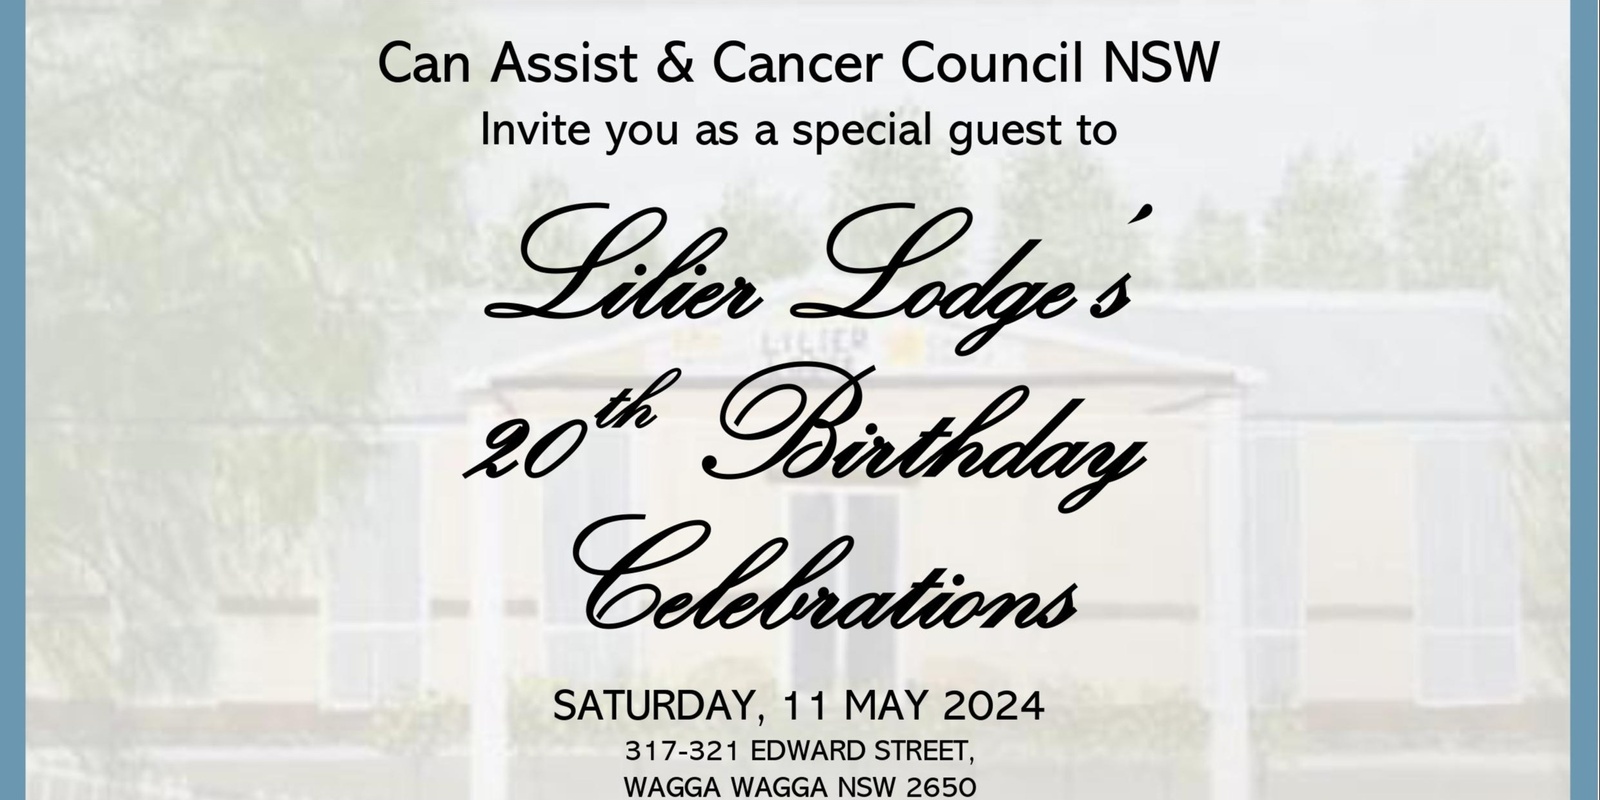 Banner image for Lilier Lodge Open Day & 20th Birthday Celebrations